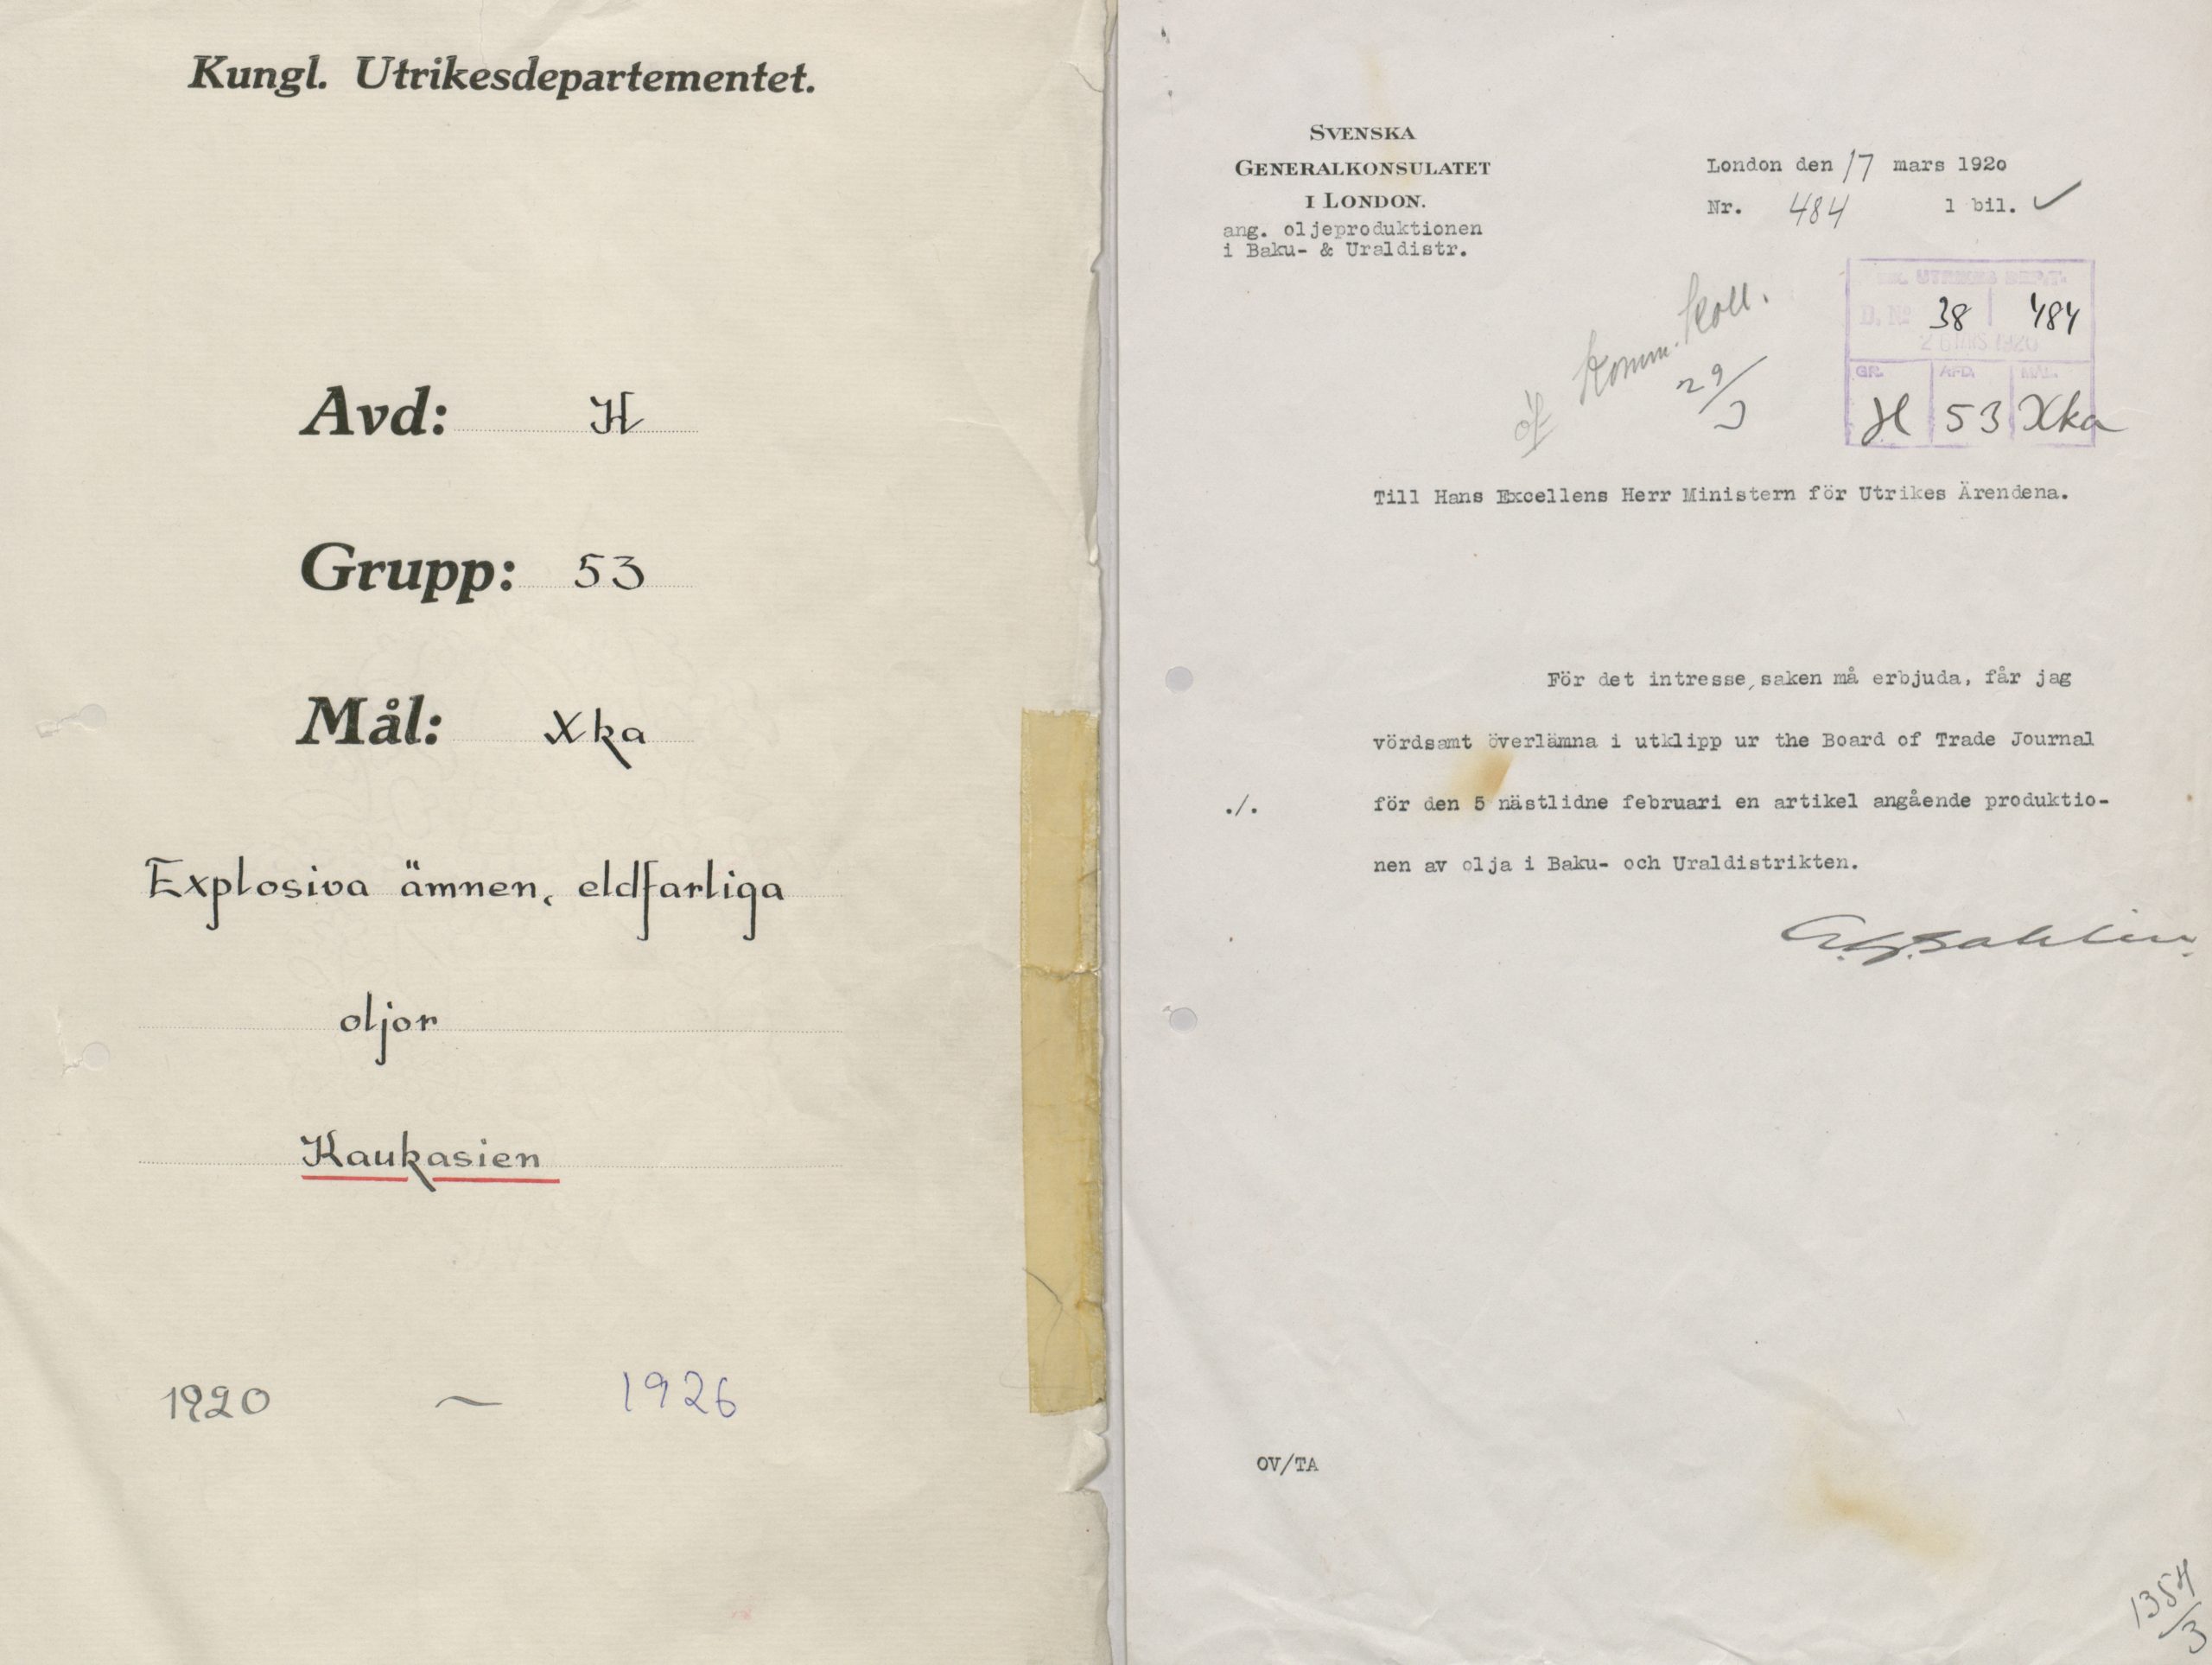 A confidential report by the Vice Consul in Moscow K. Lundberg regarding oljeindusti and oil production in the Baku area. From the Foreign Ministrys file system 1920 stored at the National Archives of Sweden.